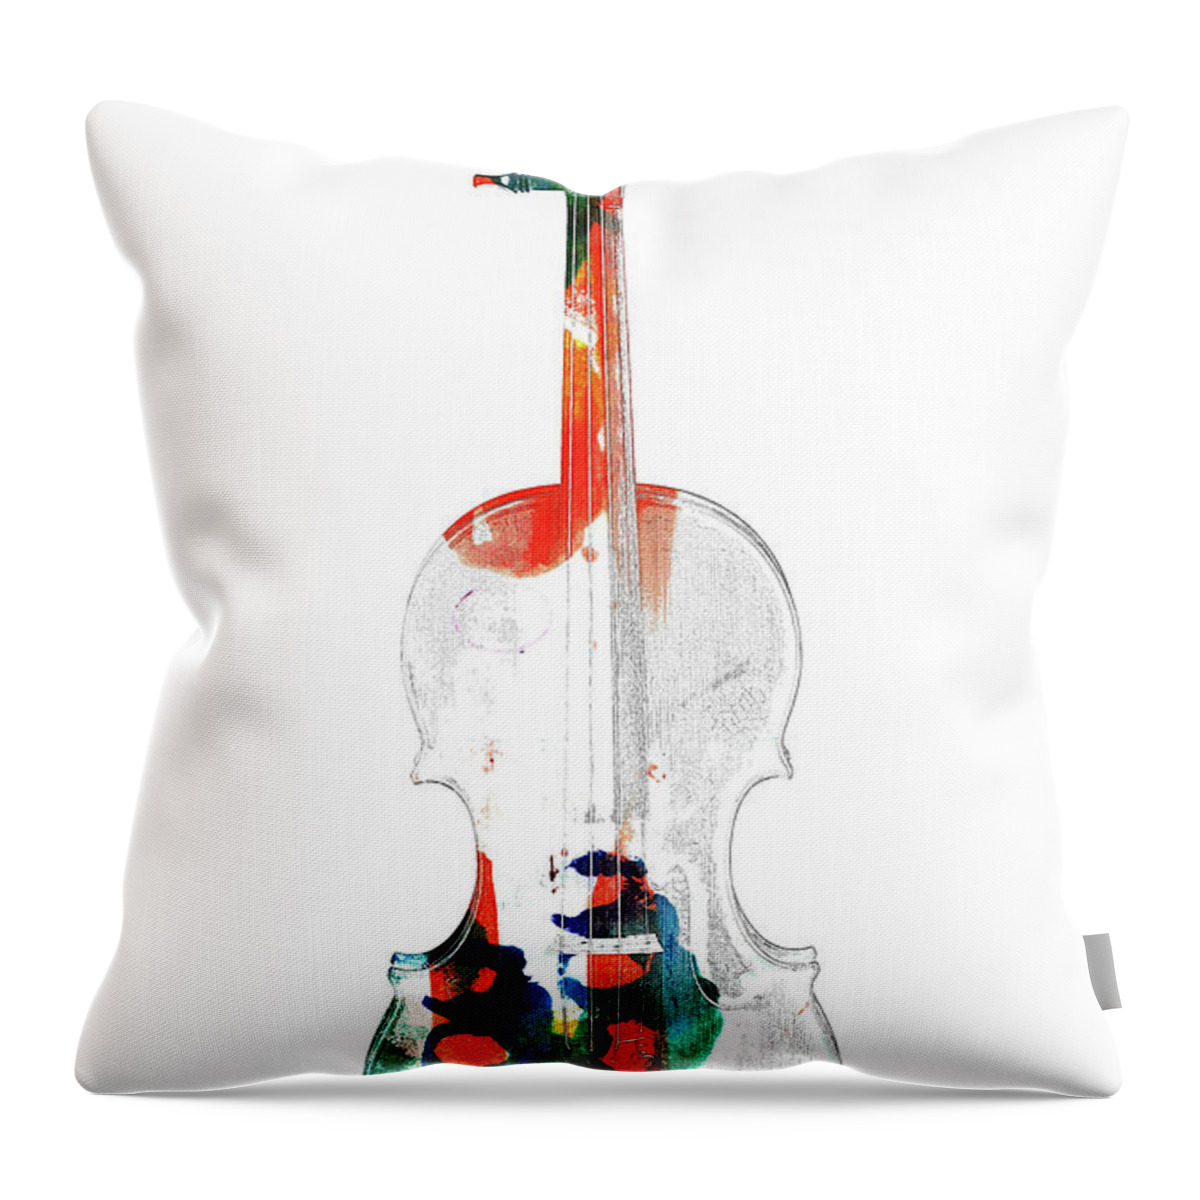 Violin Throw Pillow featuring the photograph Antique Violin 1732.53 by M K Miller